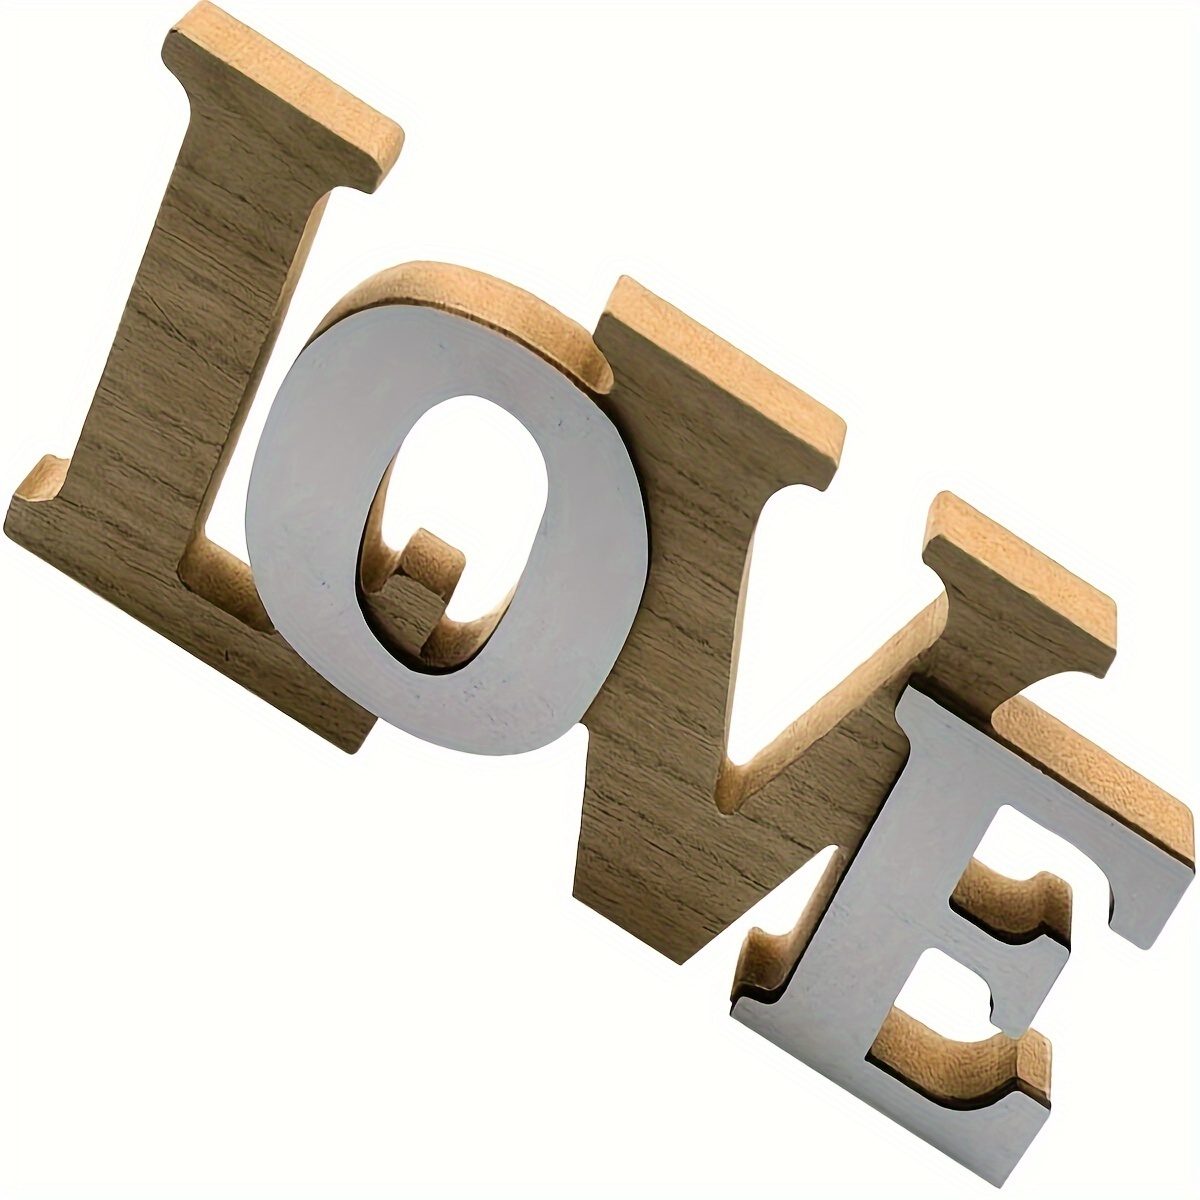 

Rustic Wooden Love Sign - Perfect For Weddings, Valentine's Day & Home Decor | Vintage Groom Cutout Centerpiece